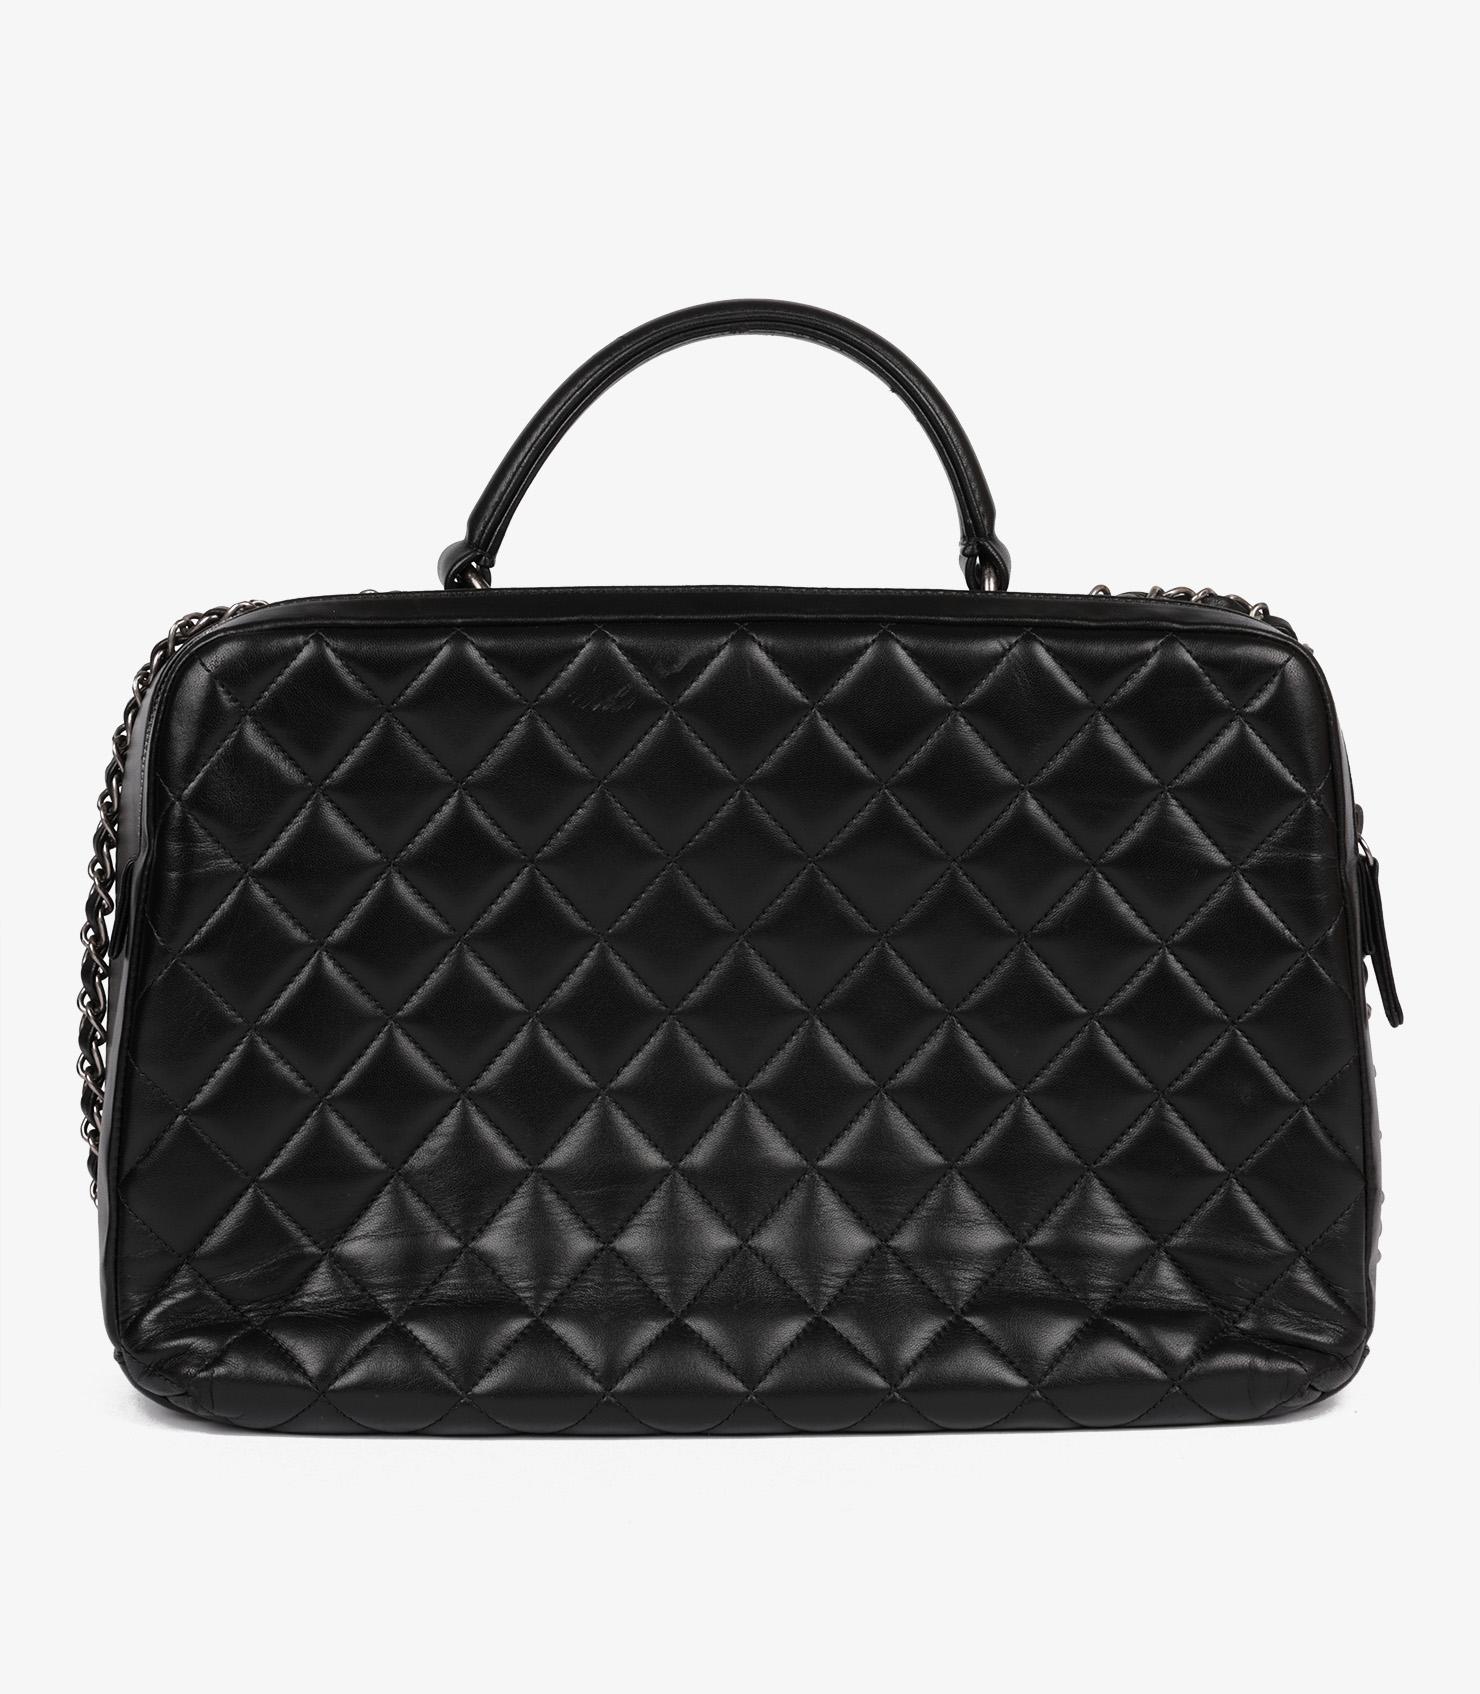 Chanel Black Quilted Lambskin Large Trendy CC Bowling Bag For Sale 1